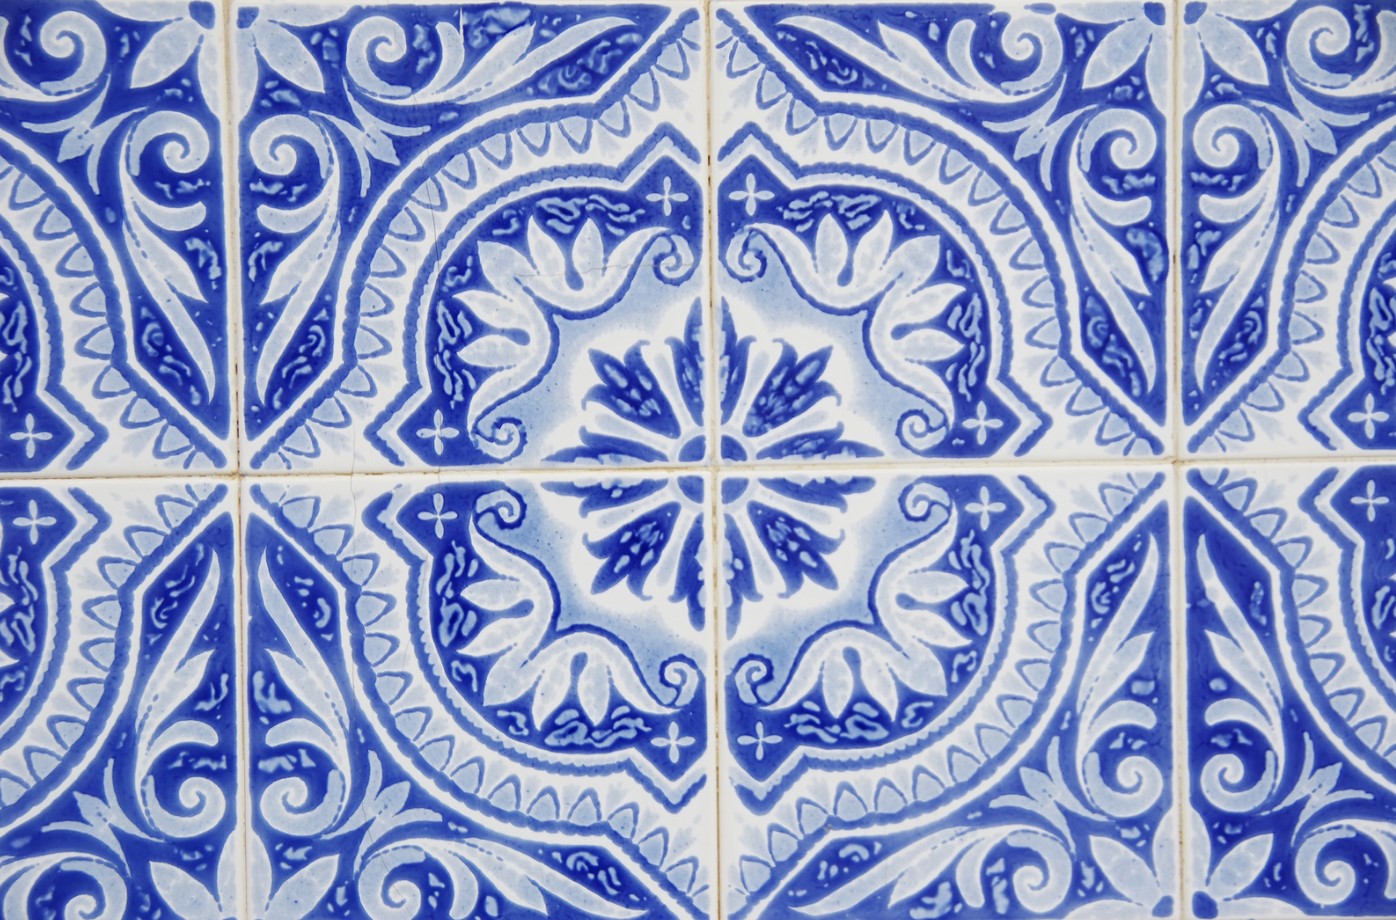 Portuguese tiles A history of art and tradition